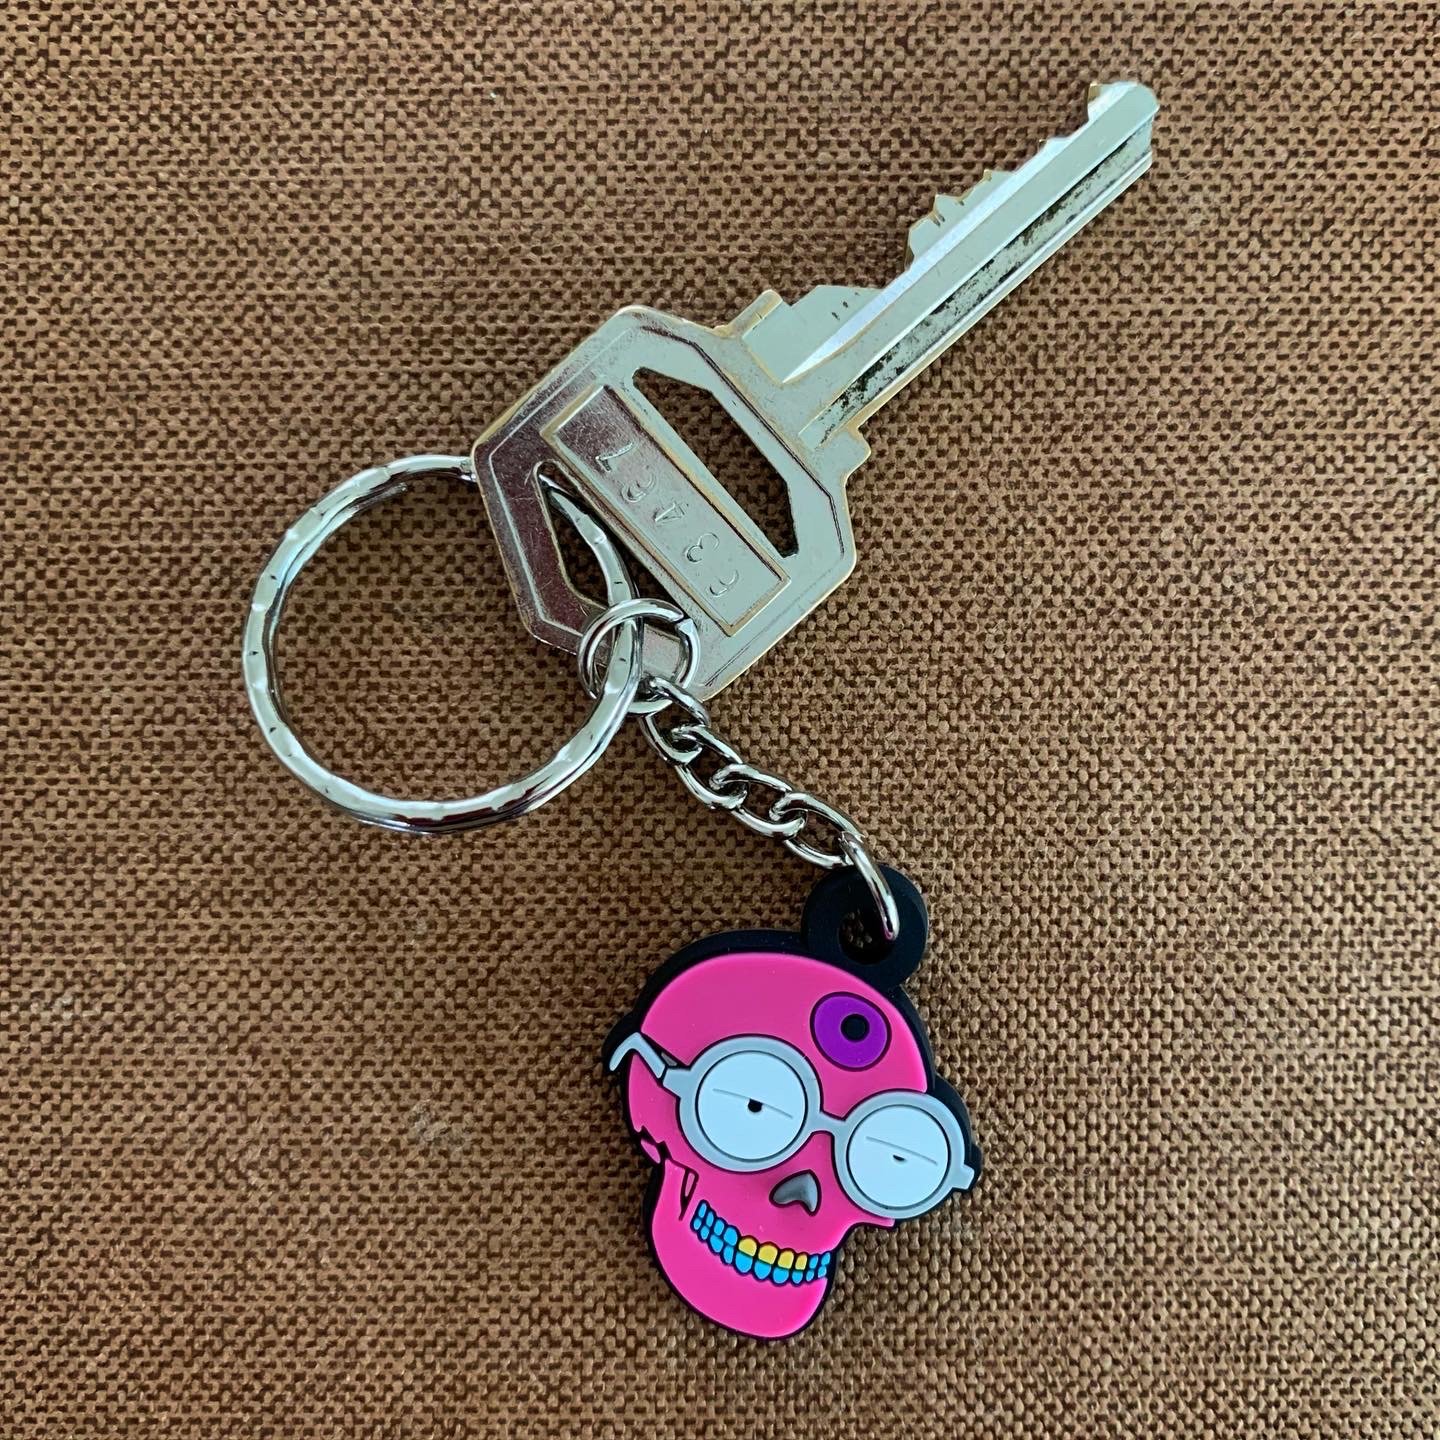 Image of Herb Mentality keychain